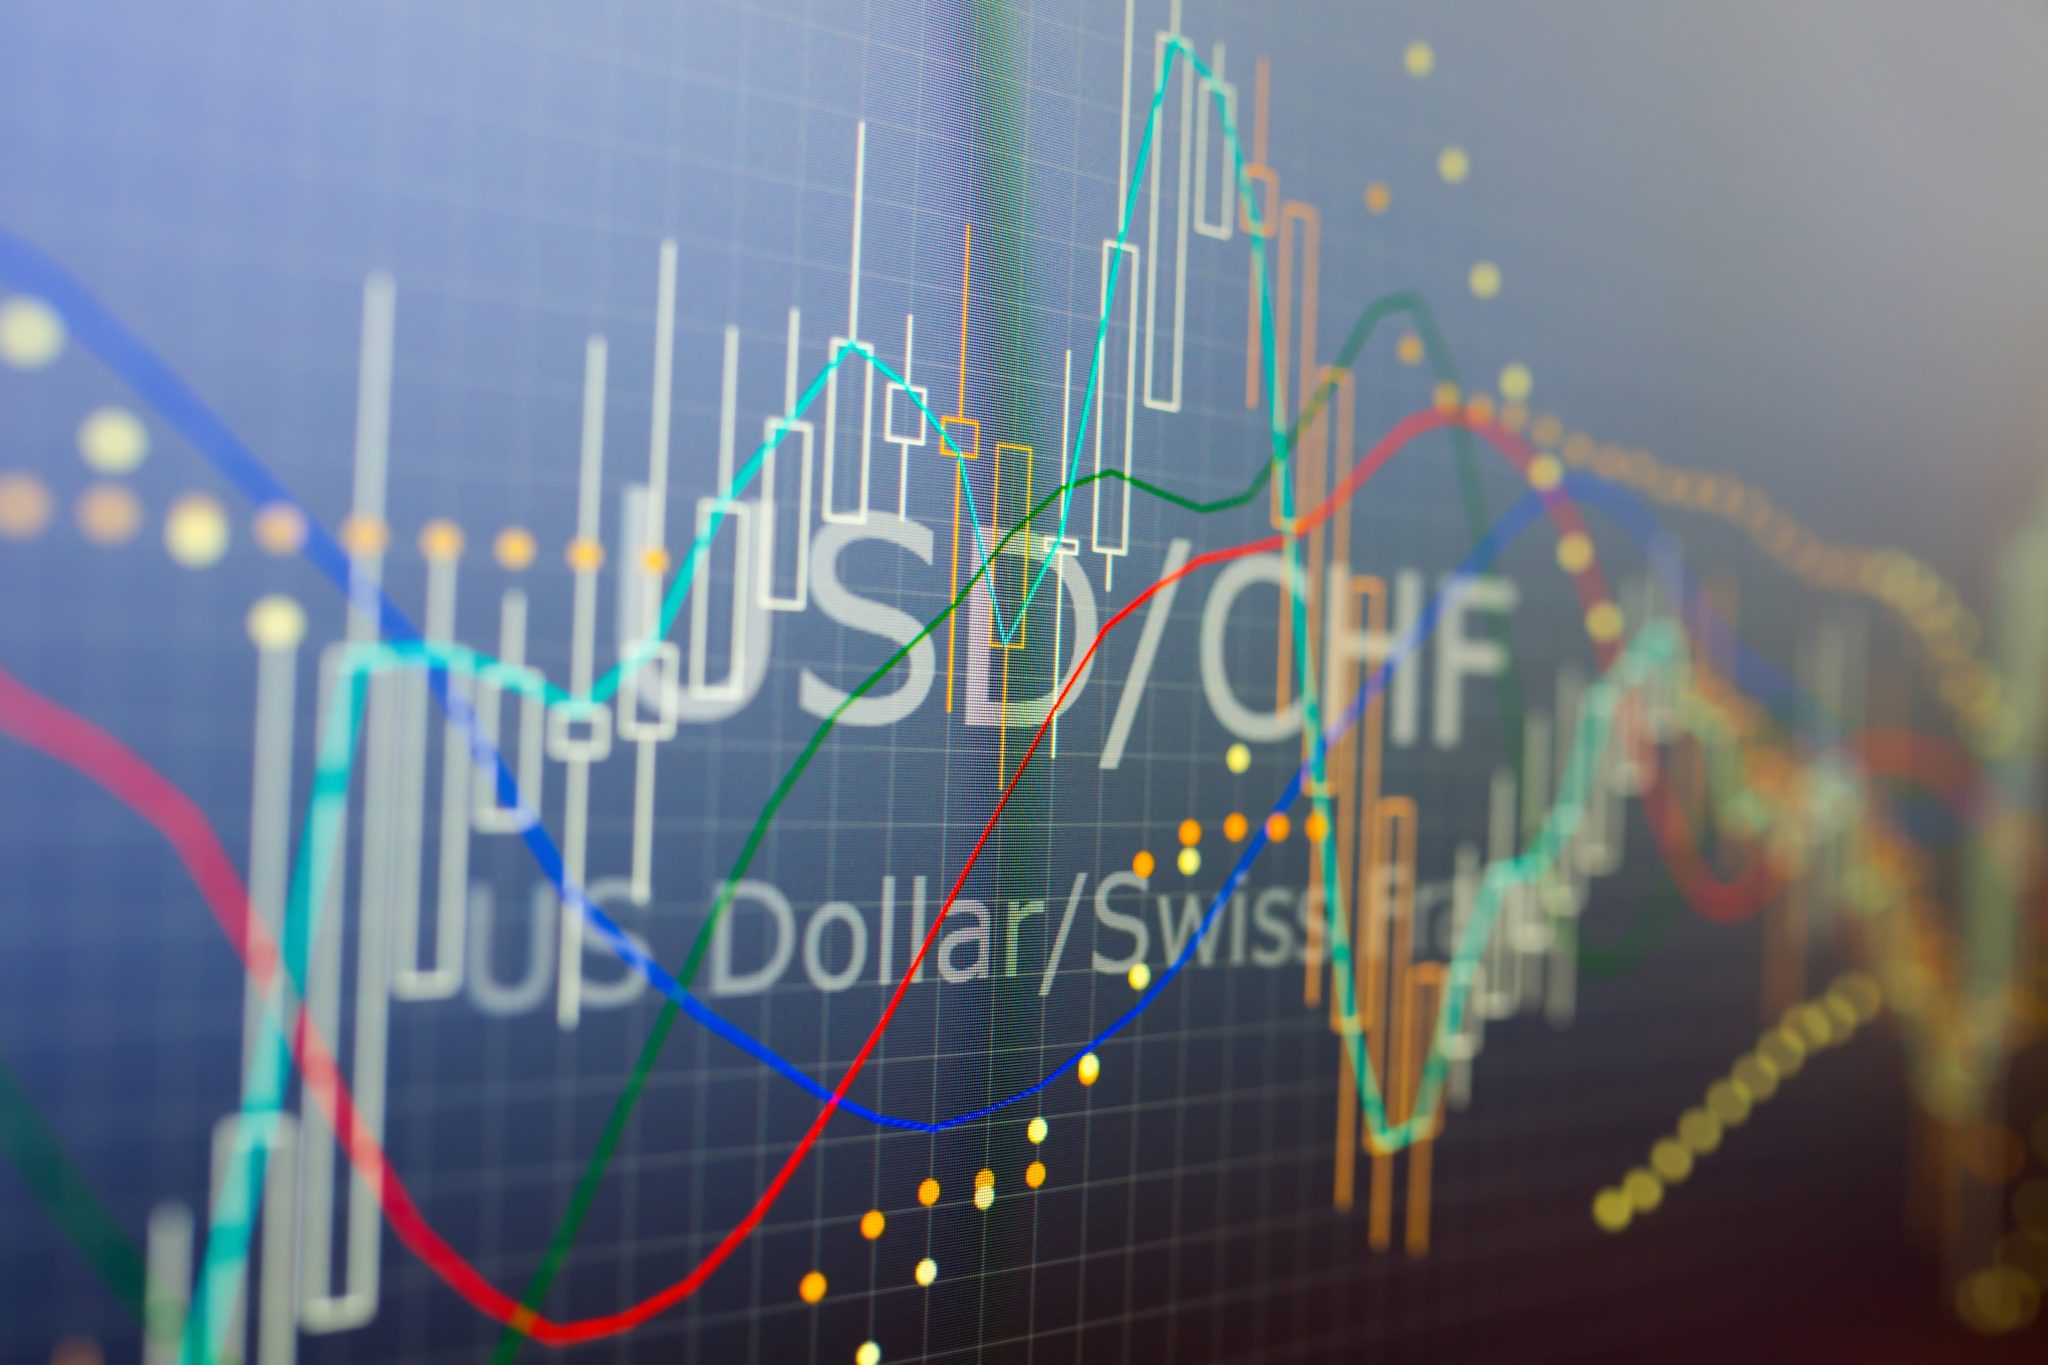 USD/CHF Slumps Past 0.9820 Following Disappointing CPI Data